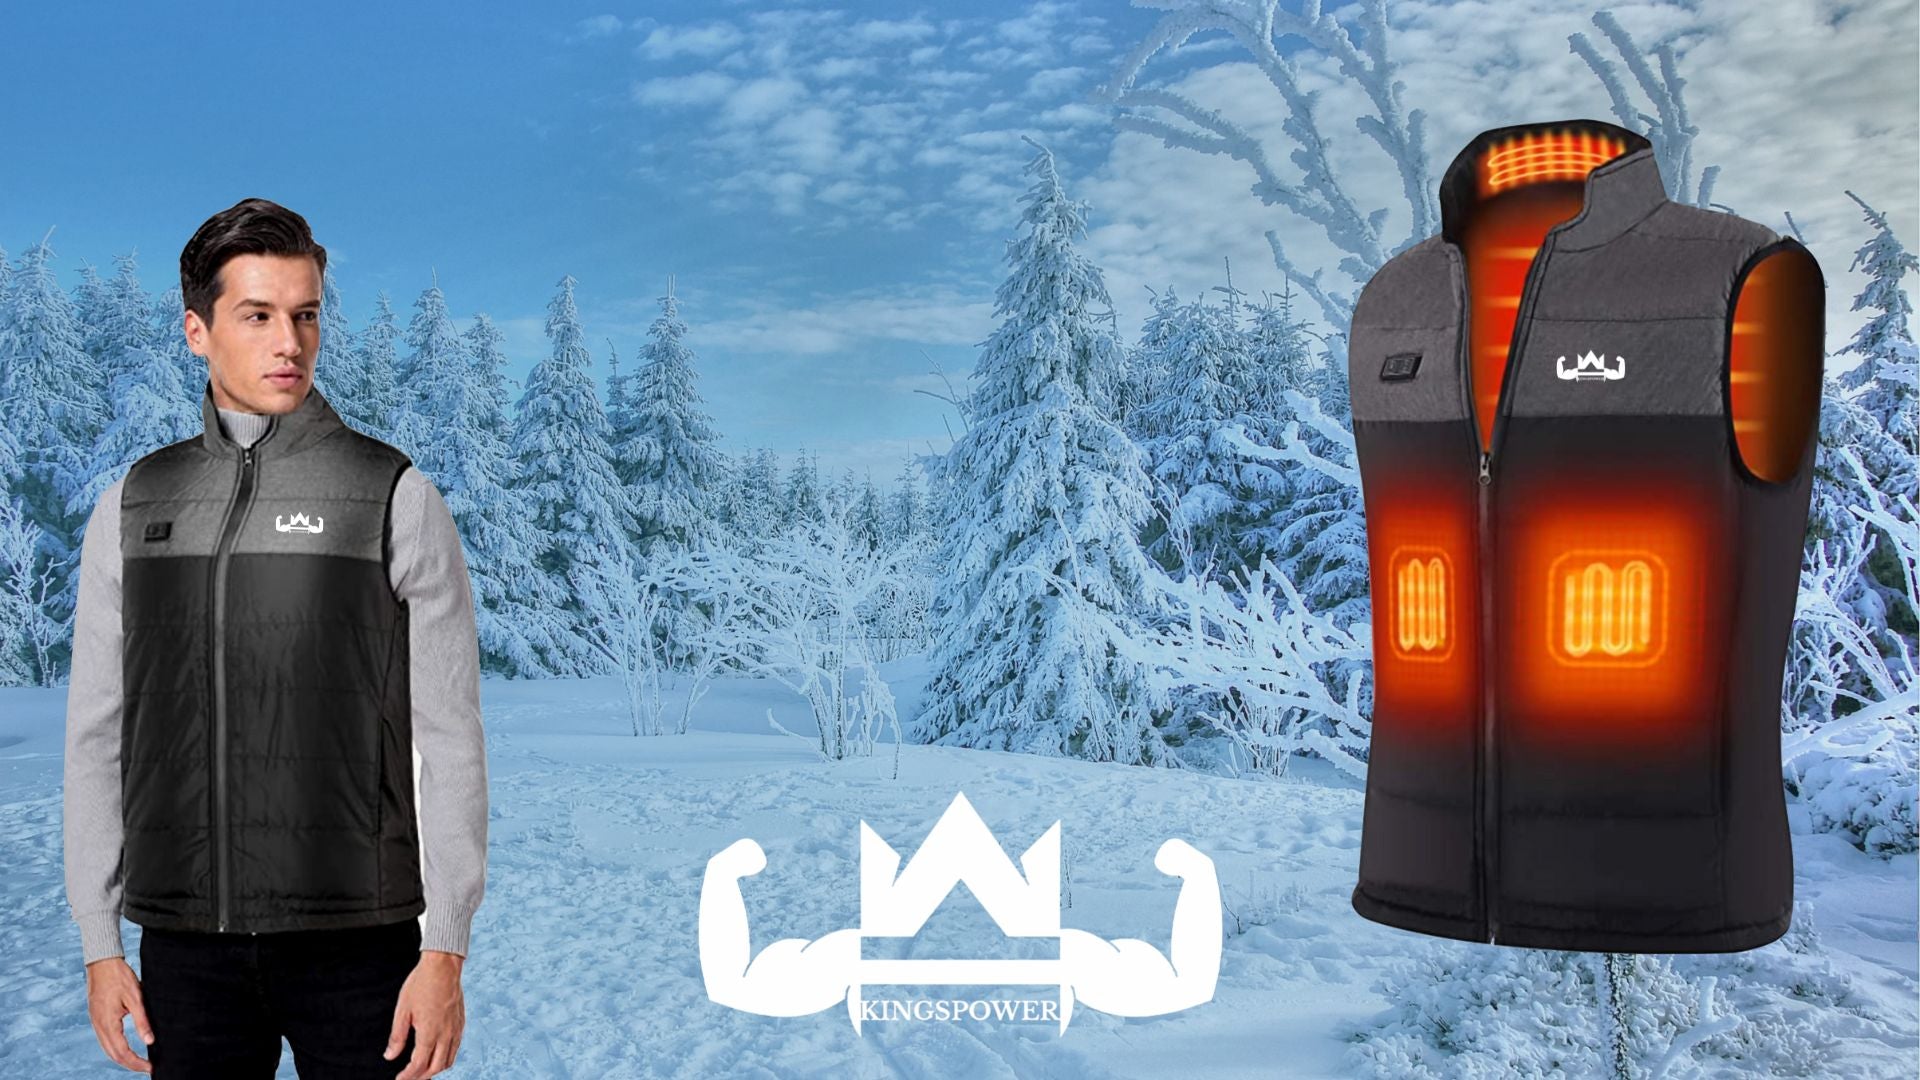 Load video: Manual of how to use the heated body warmer.